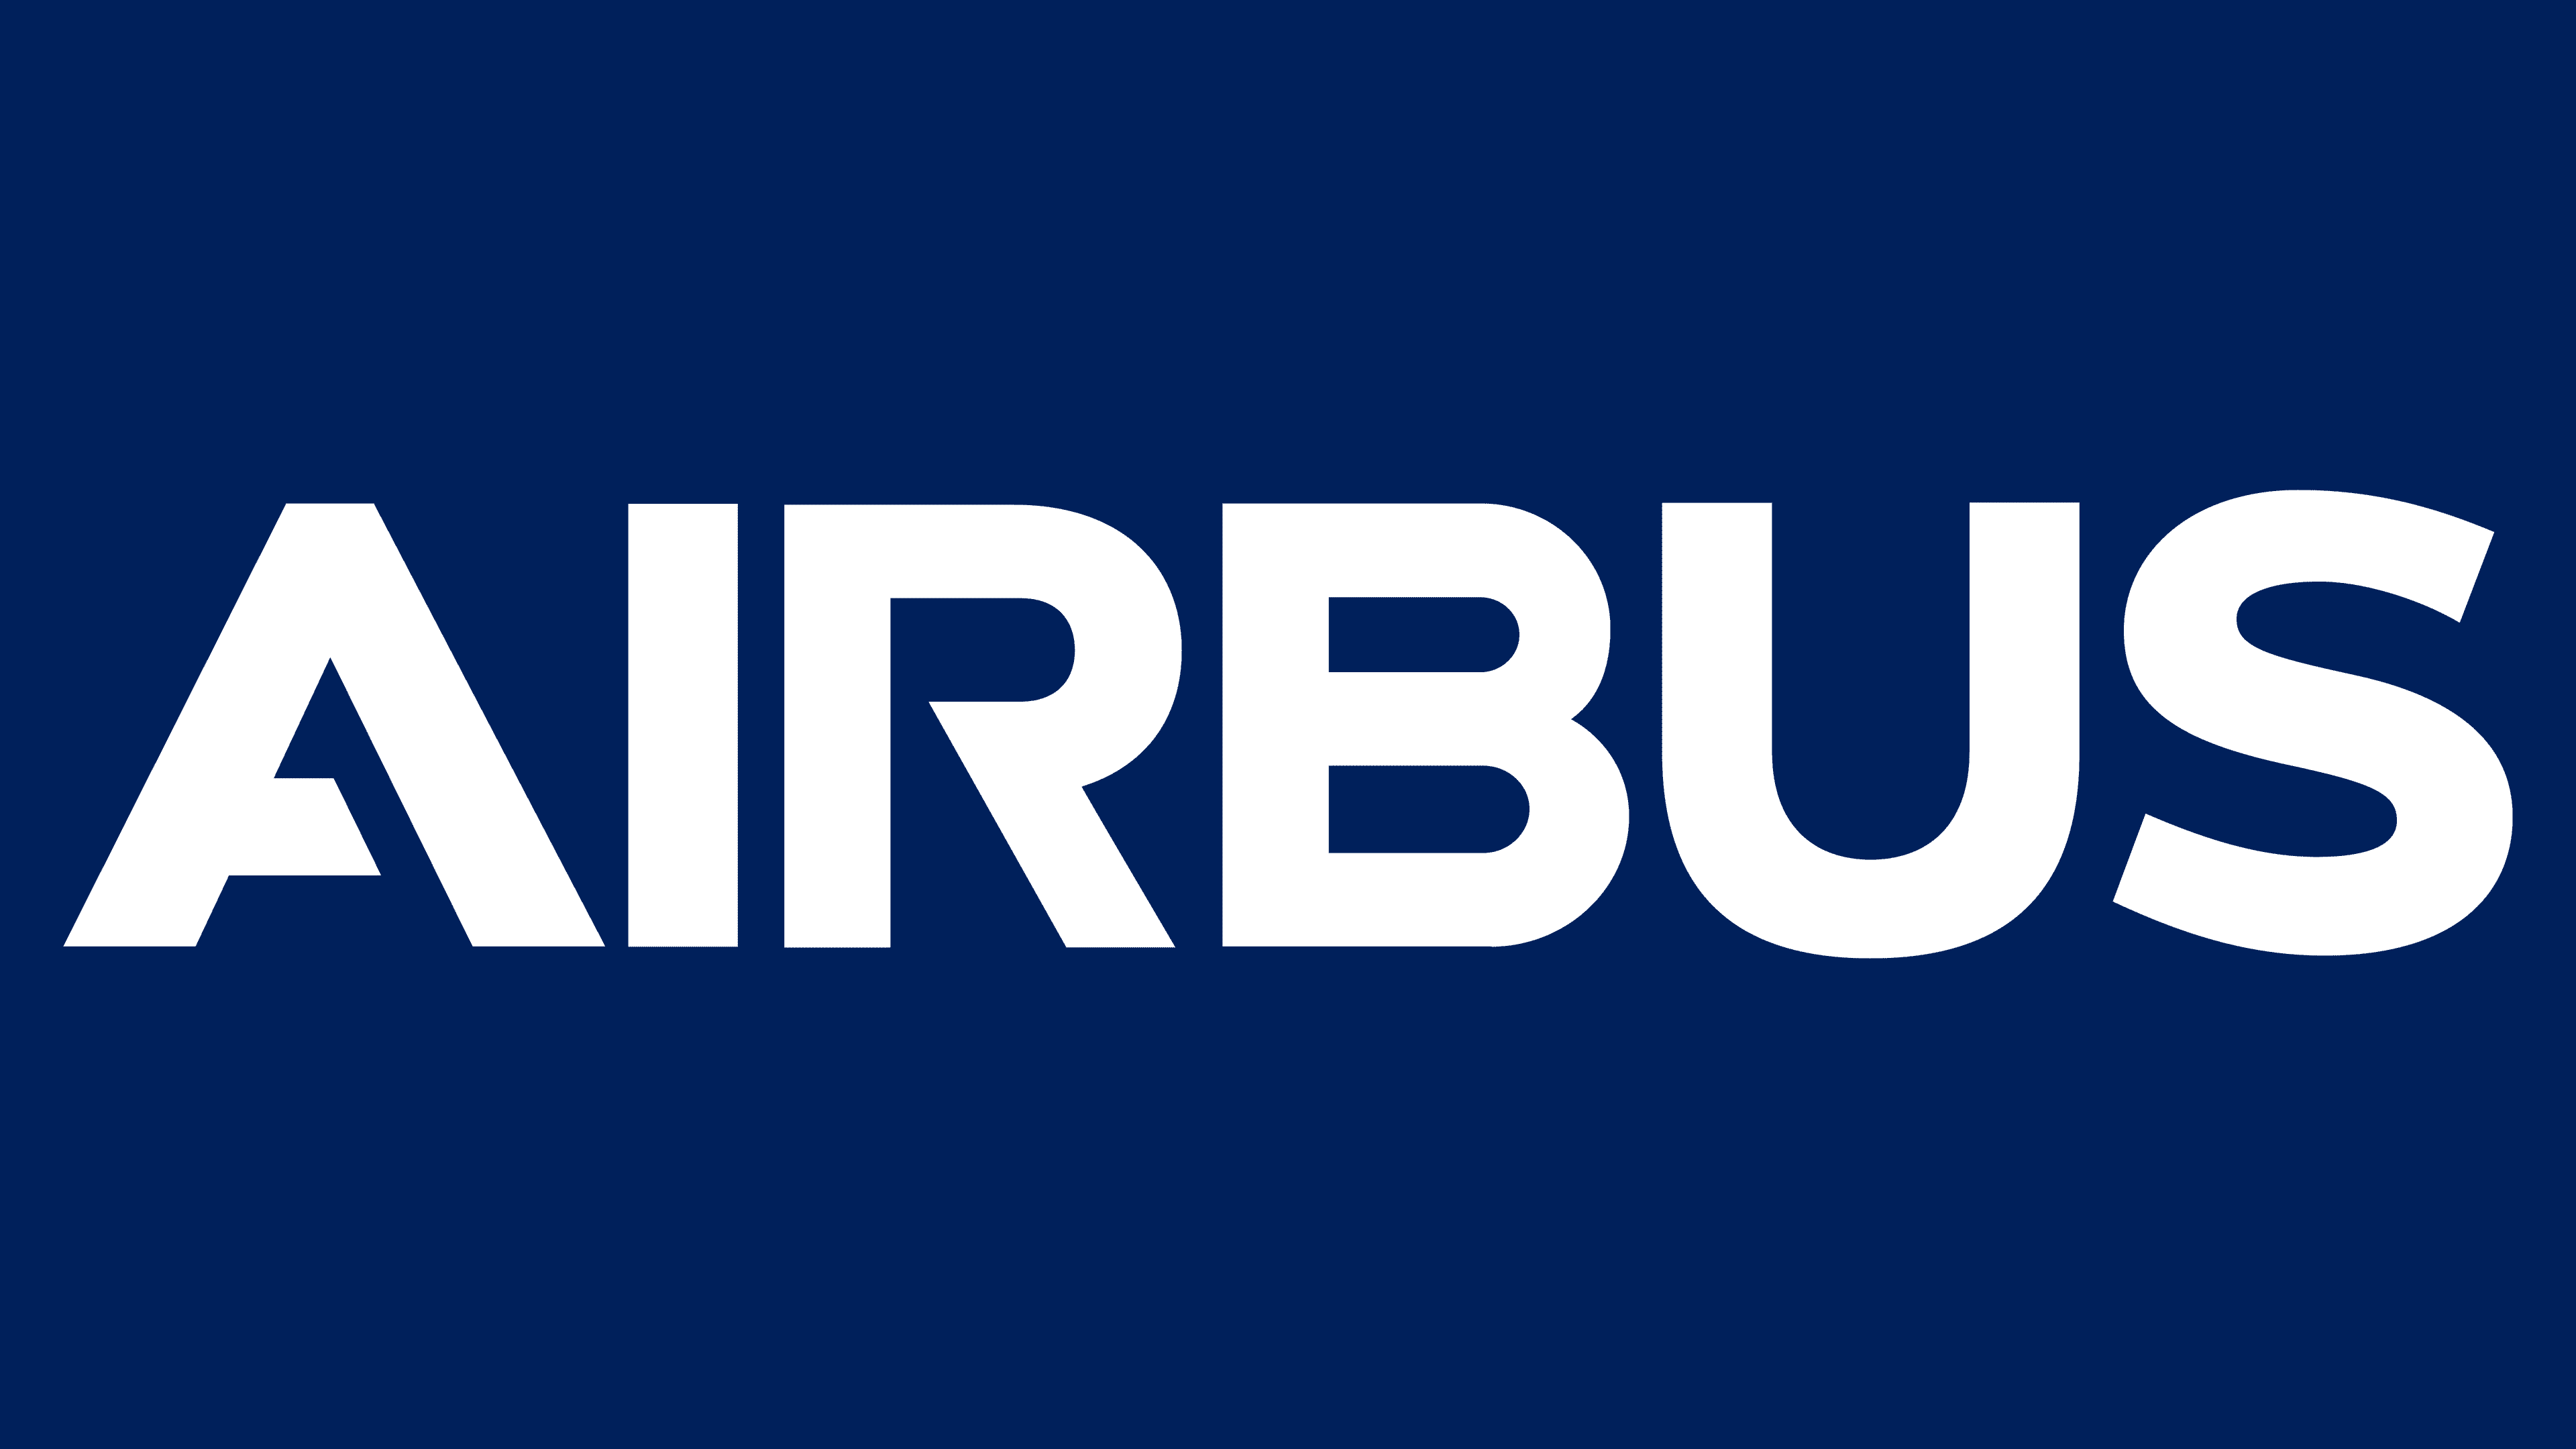 Mexico is one of the most important countries for Airbus